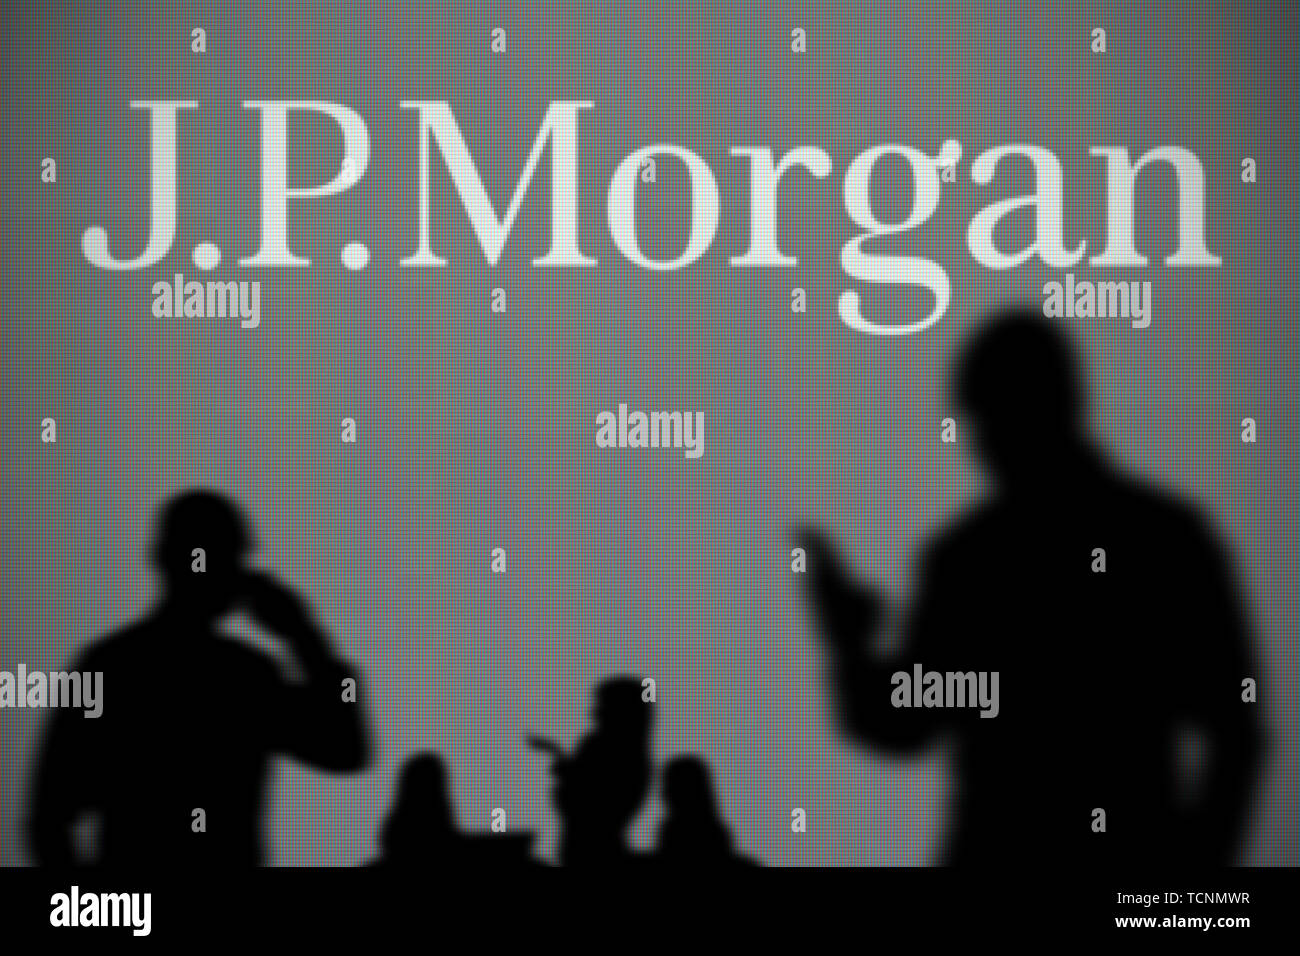 The JP Morgan logo is seen on an LED screen in the background while a silhouetted person uses a smartphone in the foreground (Editorial use only) Stock Photo